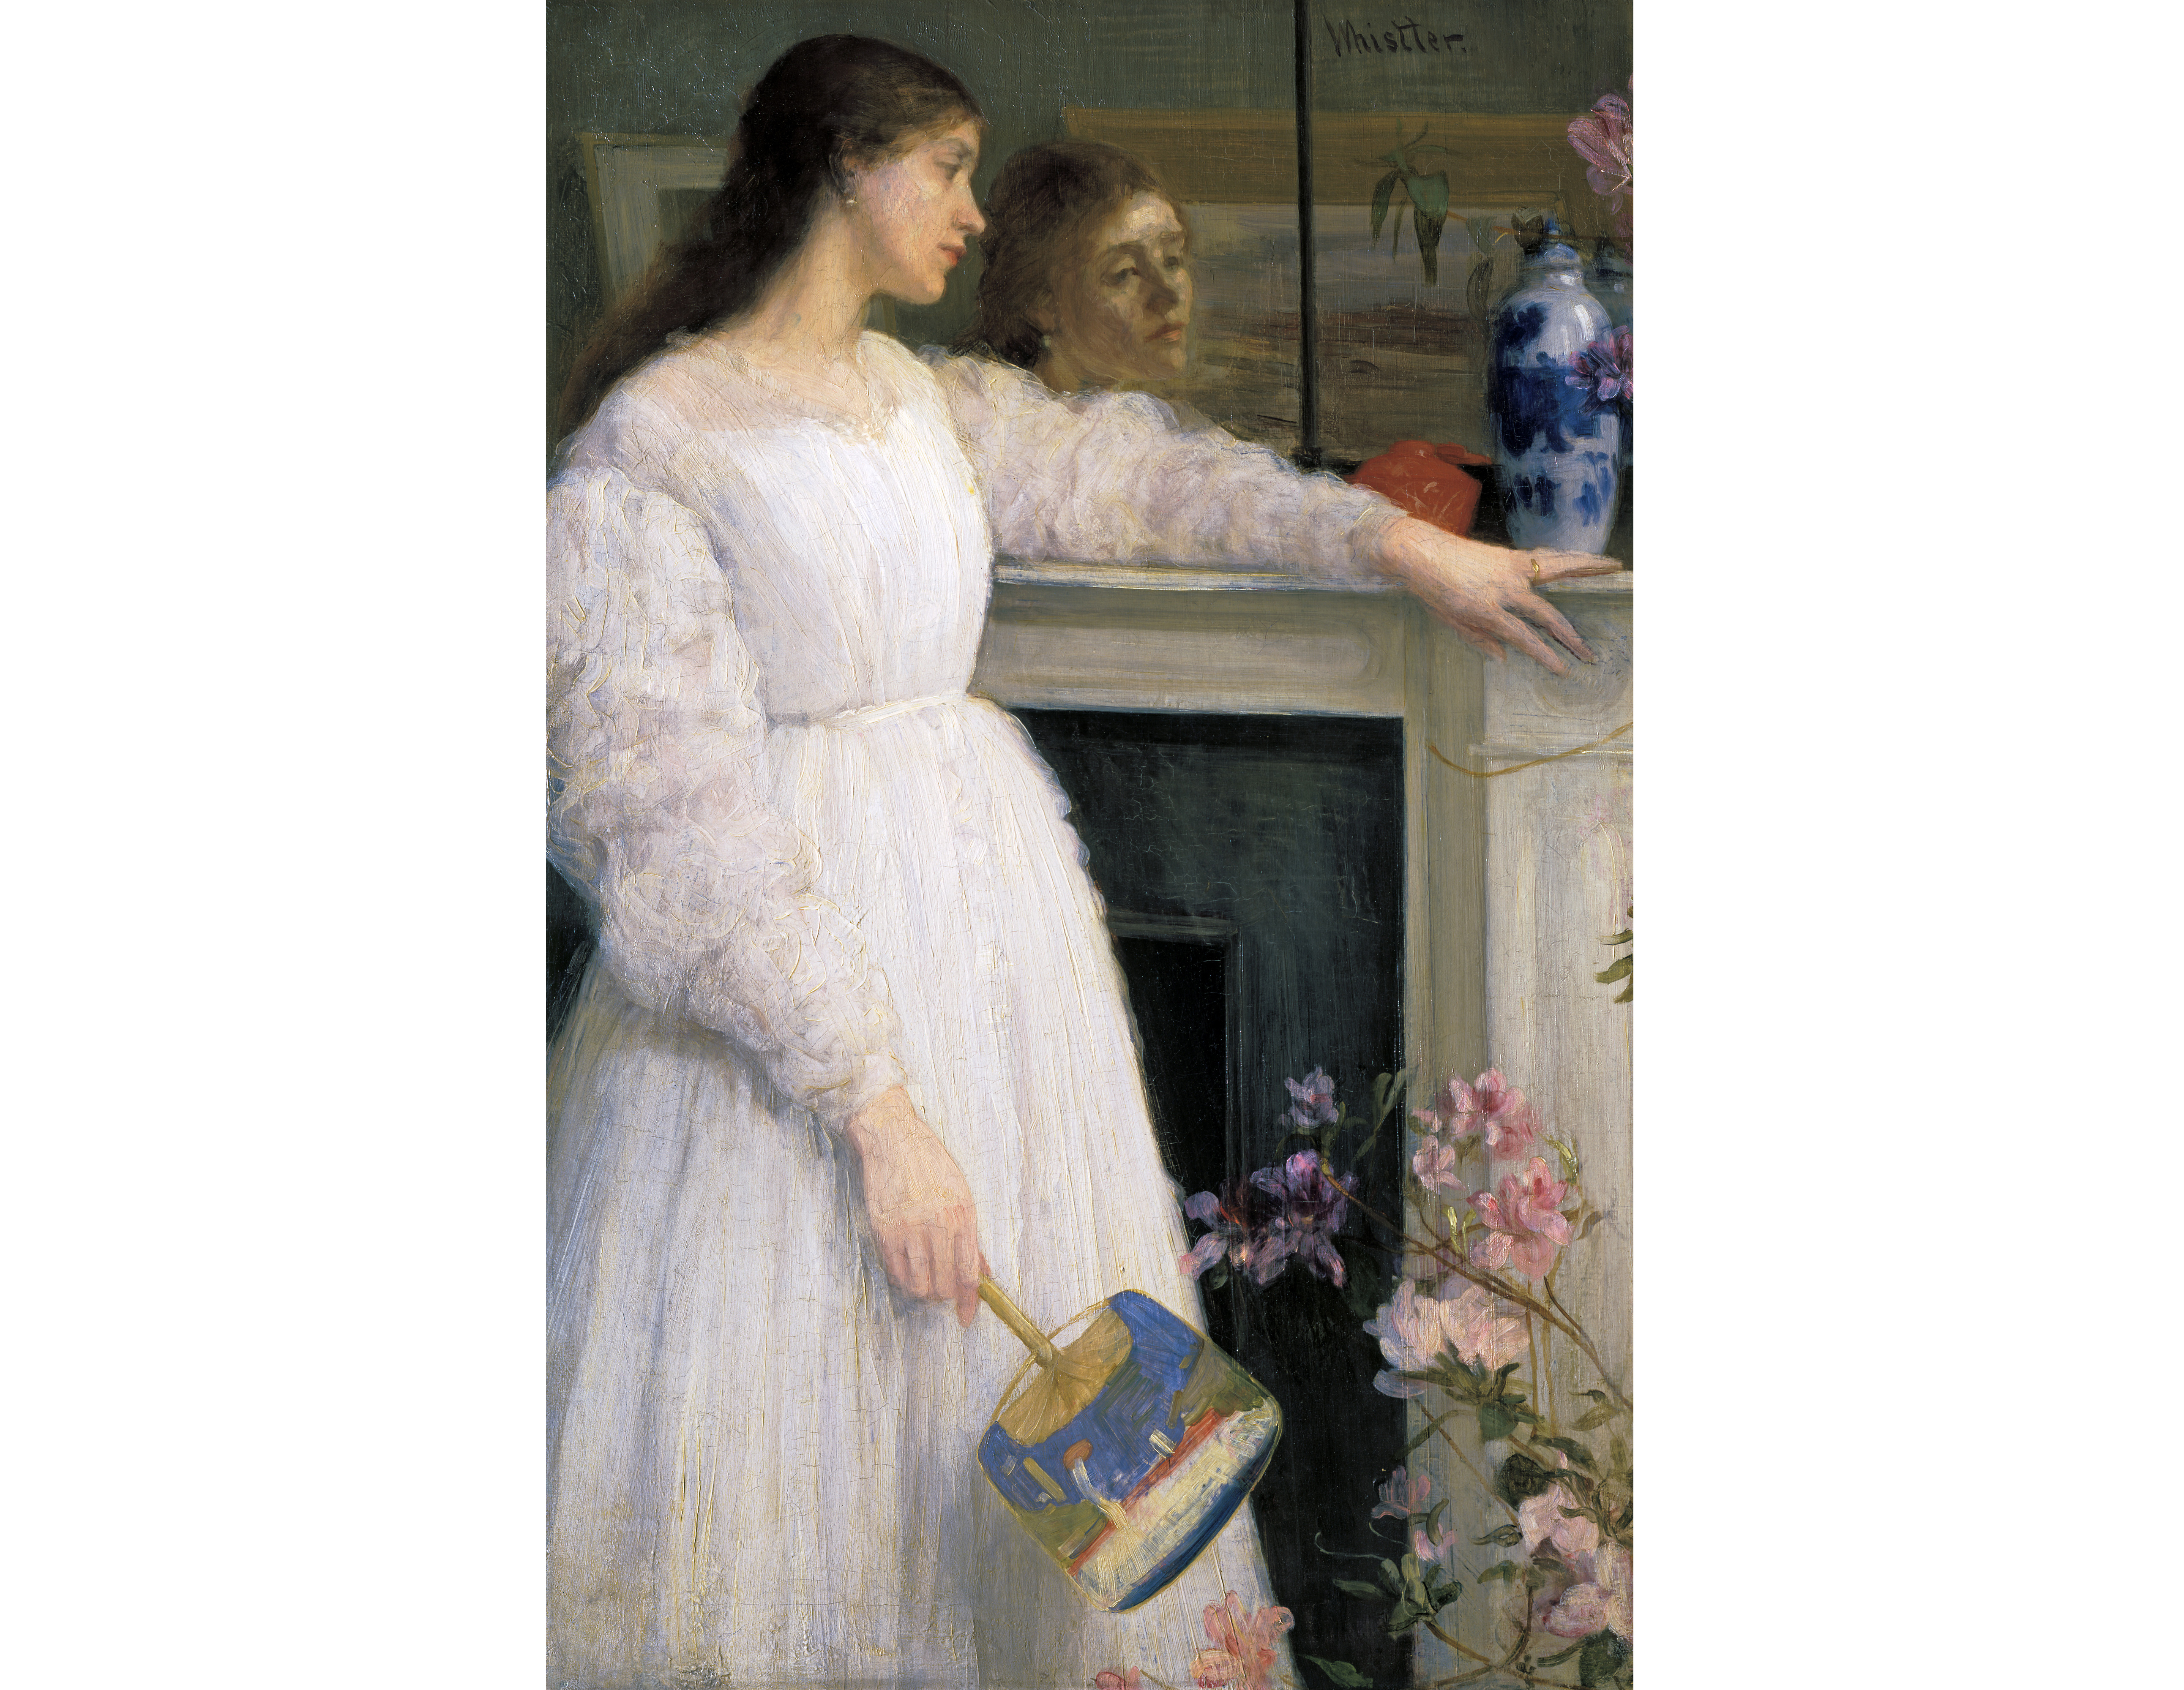 James McNeill Whistler, ‘Symphony in White, No. 2: The Little White Girl,’ 1864. Oil on canvas. Overall: 76.5 by 51.1cm (30 1/8 by 20 1/8in), framed: 108.5 by 83 by 11.8cm (42 11/16 by 32 11/16 by 4 5/8 in). Tate, London, bequeathed by Arthur Studd 1919. © Tate, London 2017